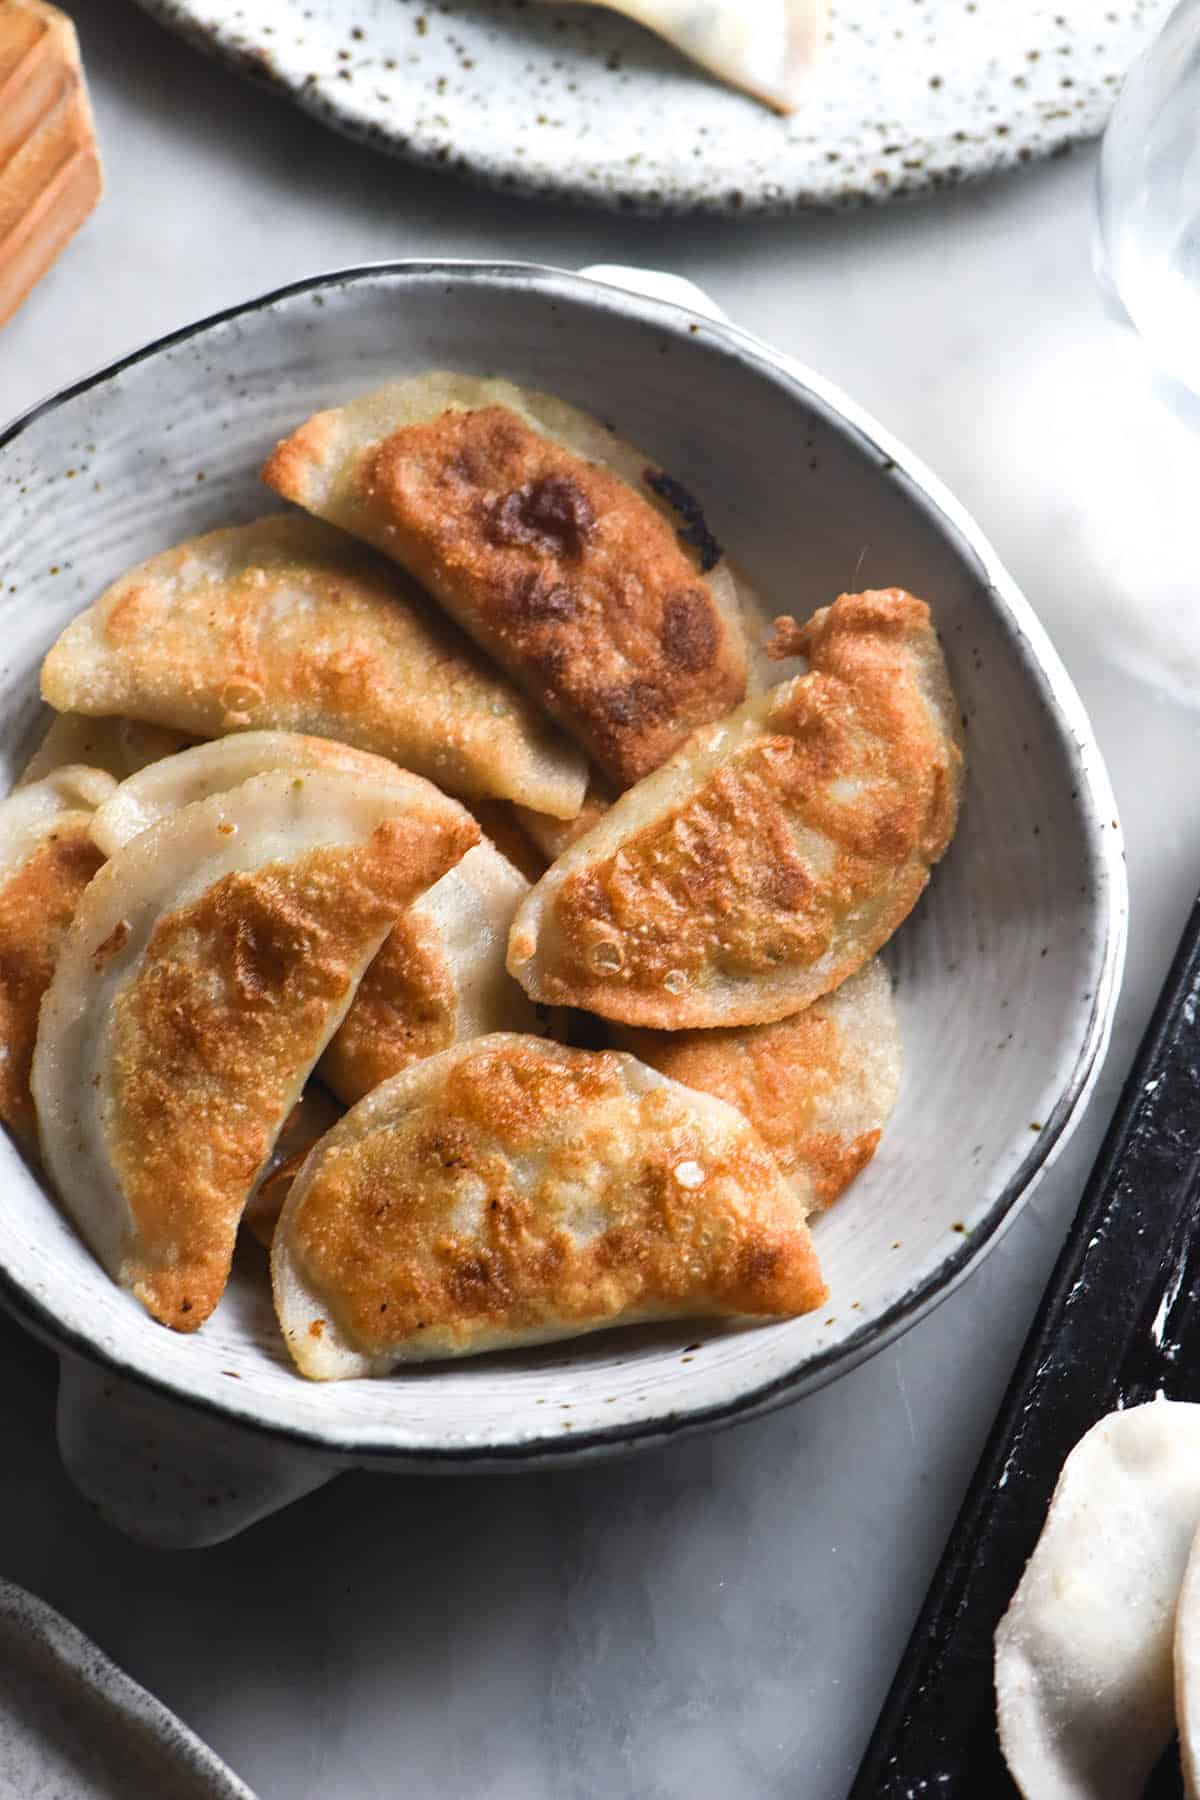 An aerial view of a bowl filled with crispy fried Varenkyky that are gluten free and filled with a FODMAP friendly leek, potato and cheese filling. The Vareniki are crispy and golden brown. The bowl sits on a white marble table surrounded by trays of uncooked vareniki.